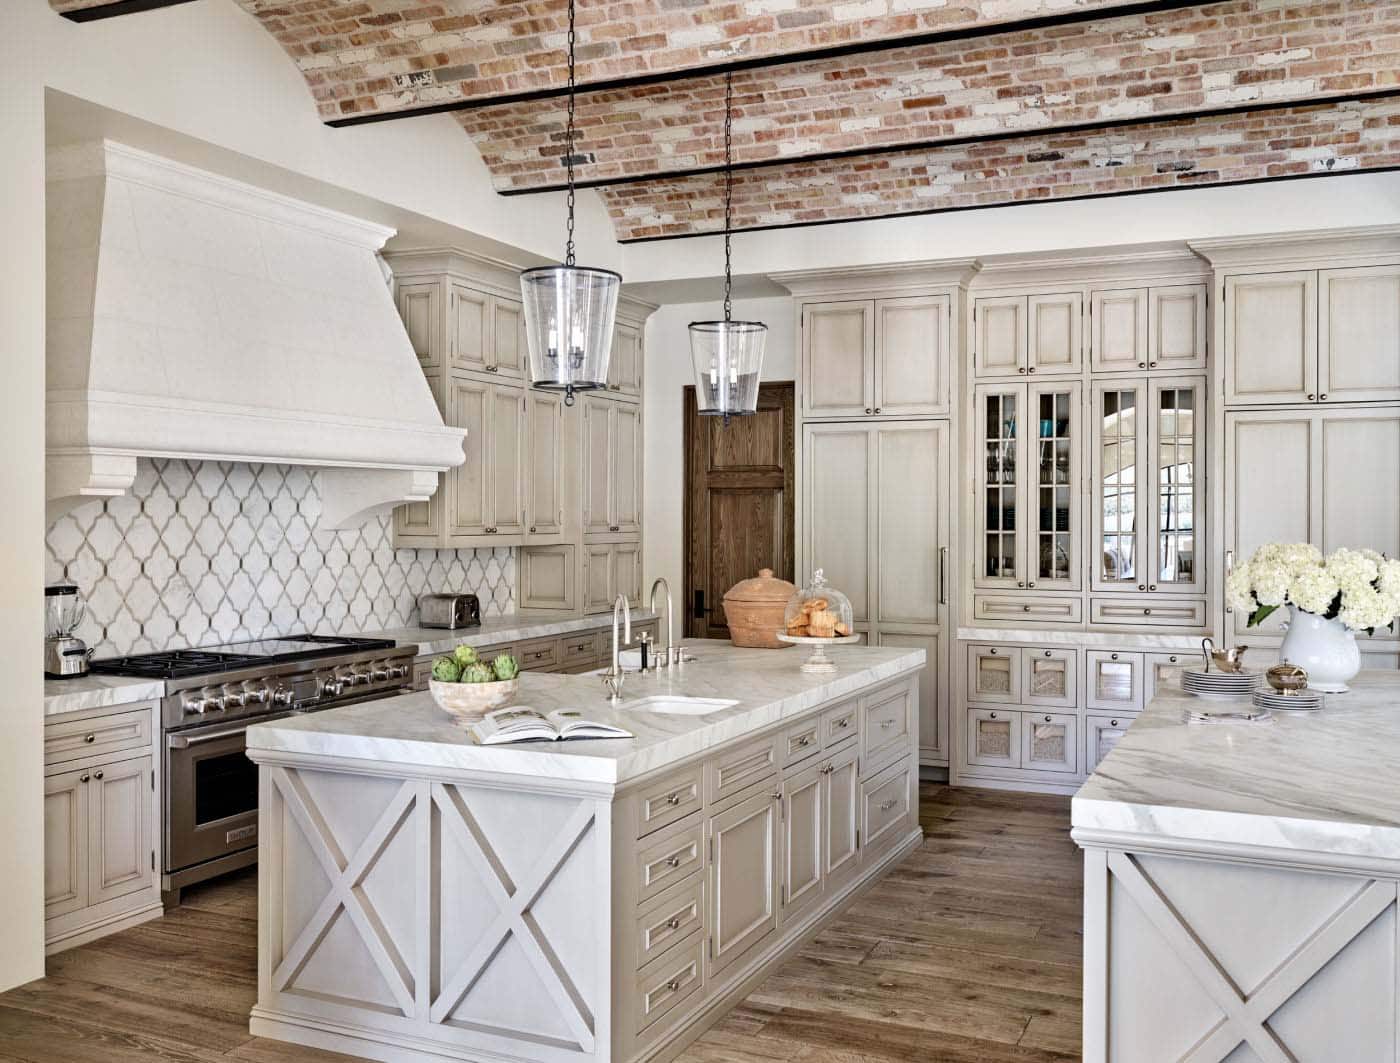 mediterranean style kitchen with an island and marble countertops